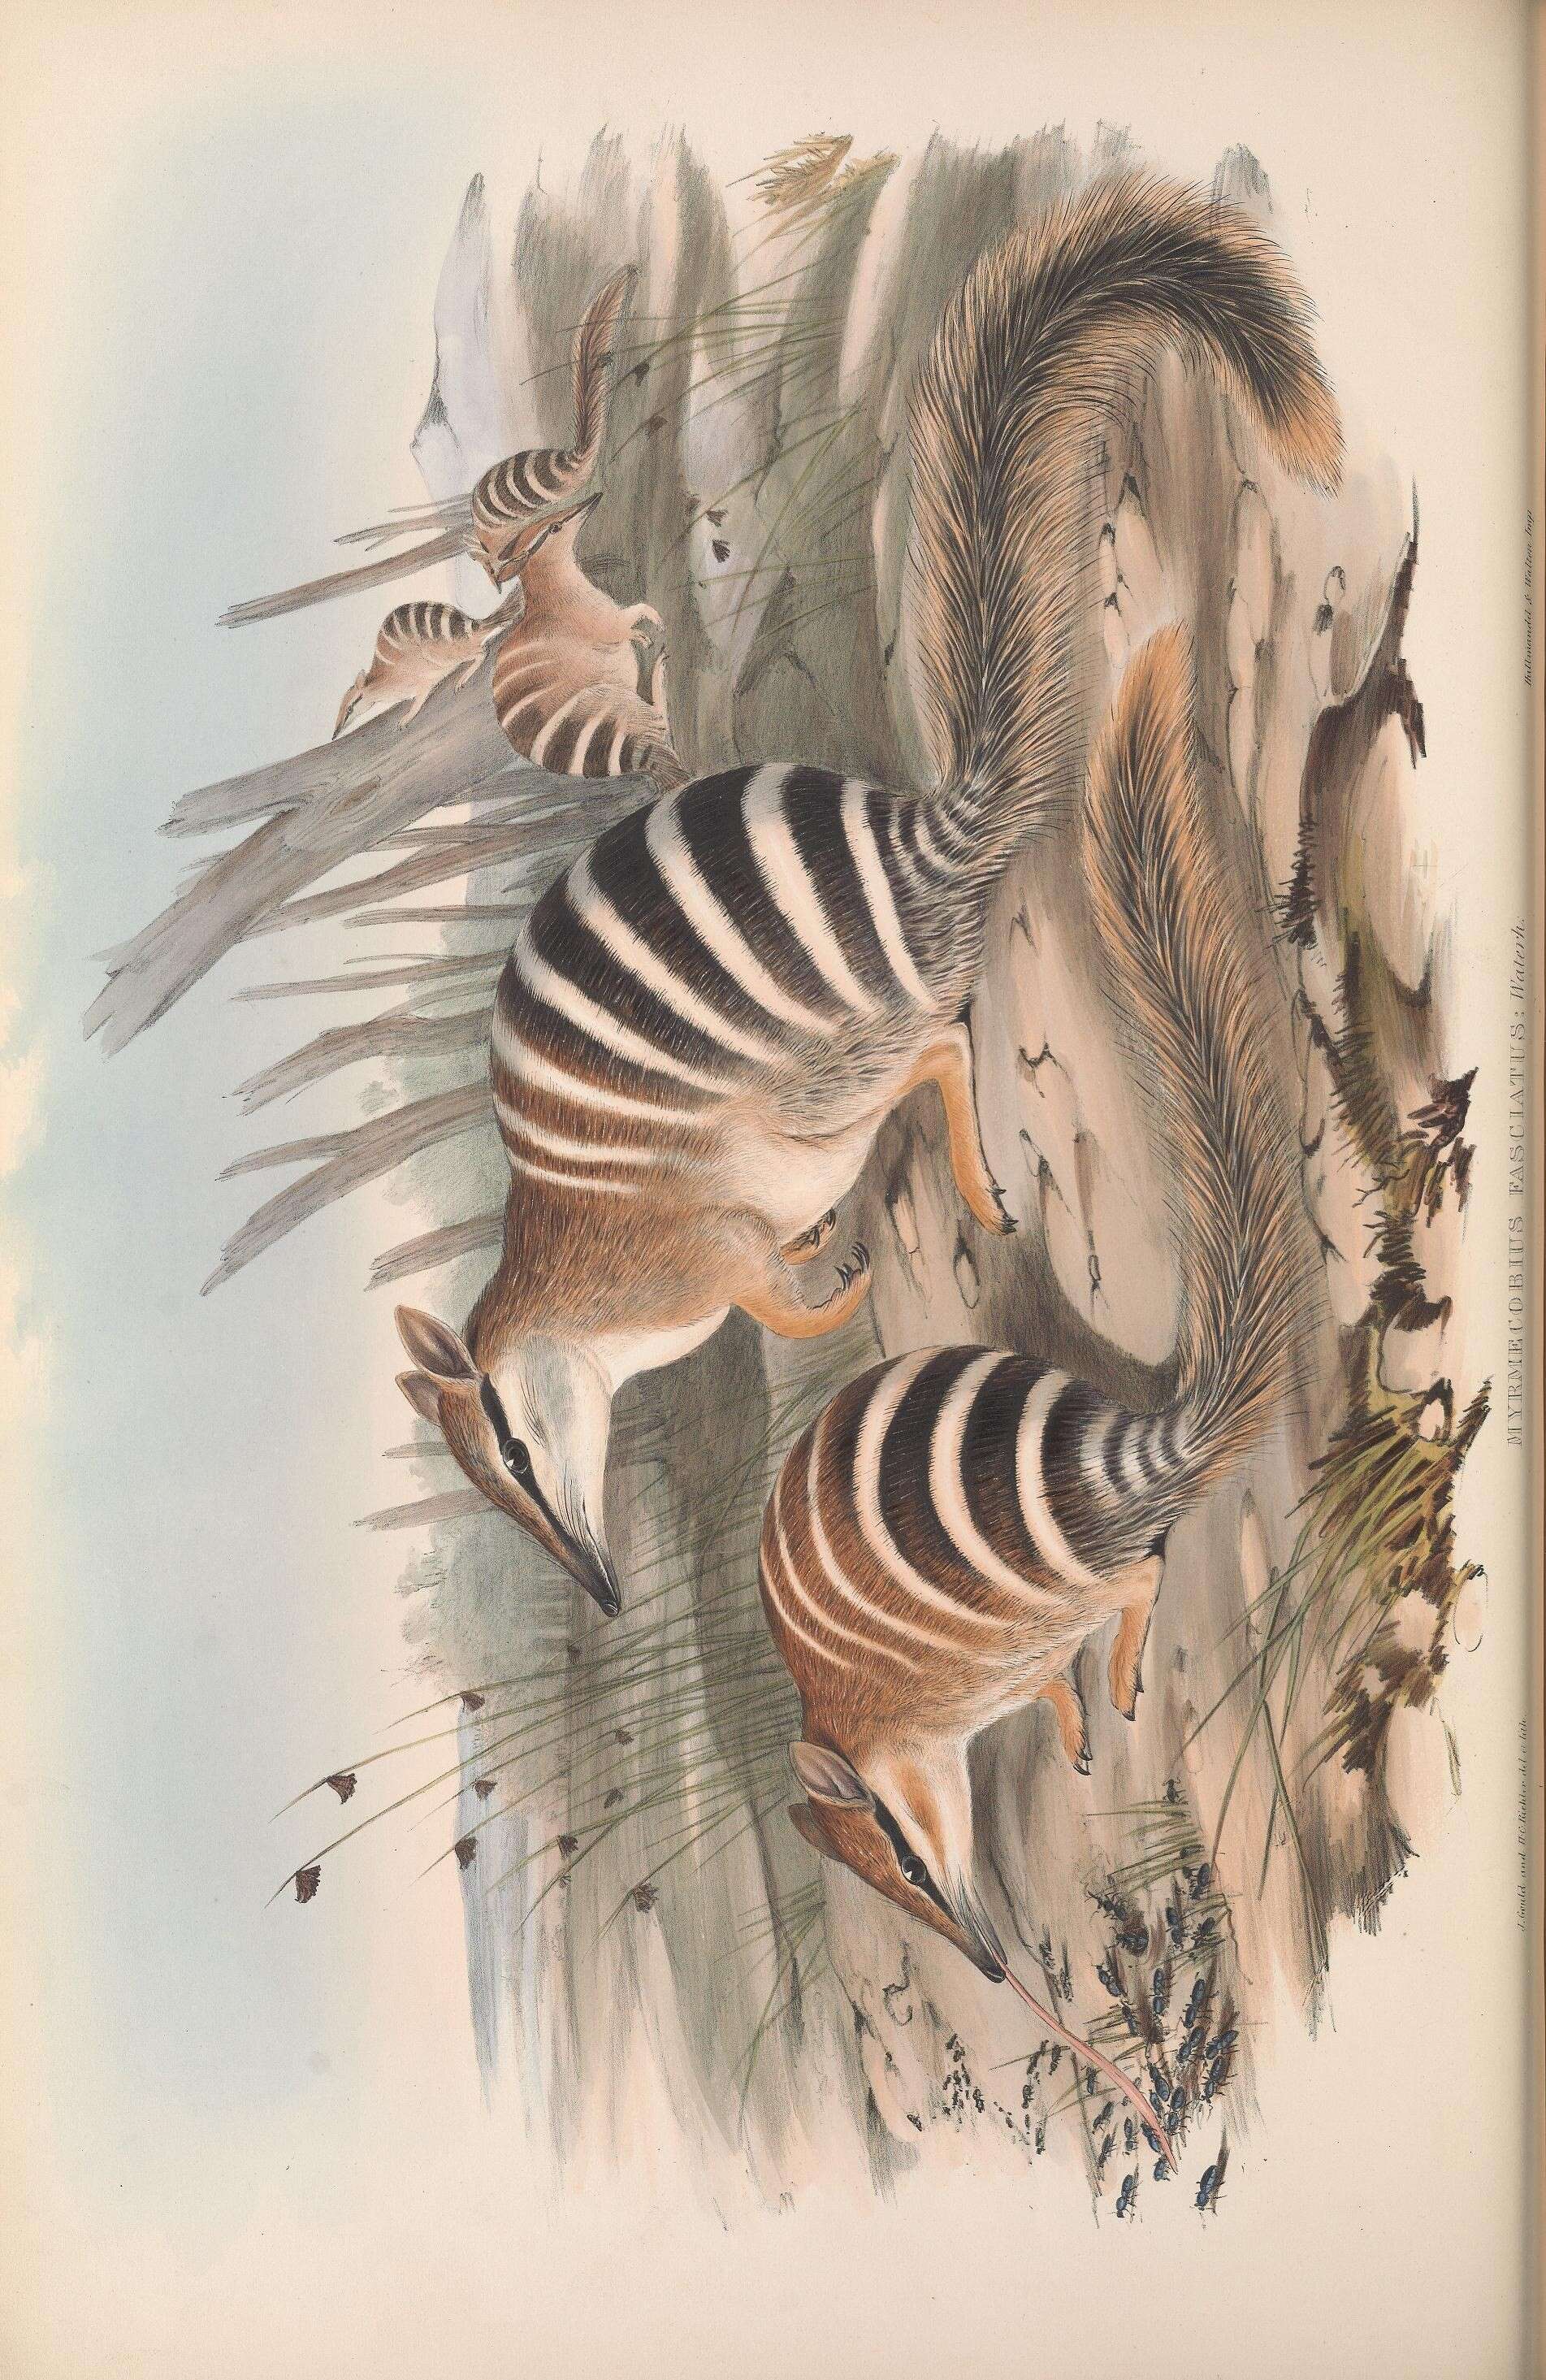 Image of numbats